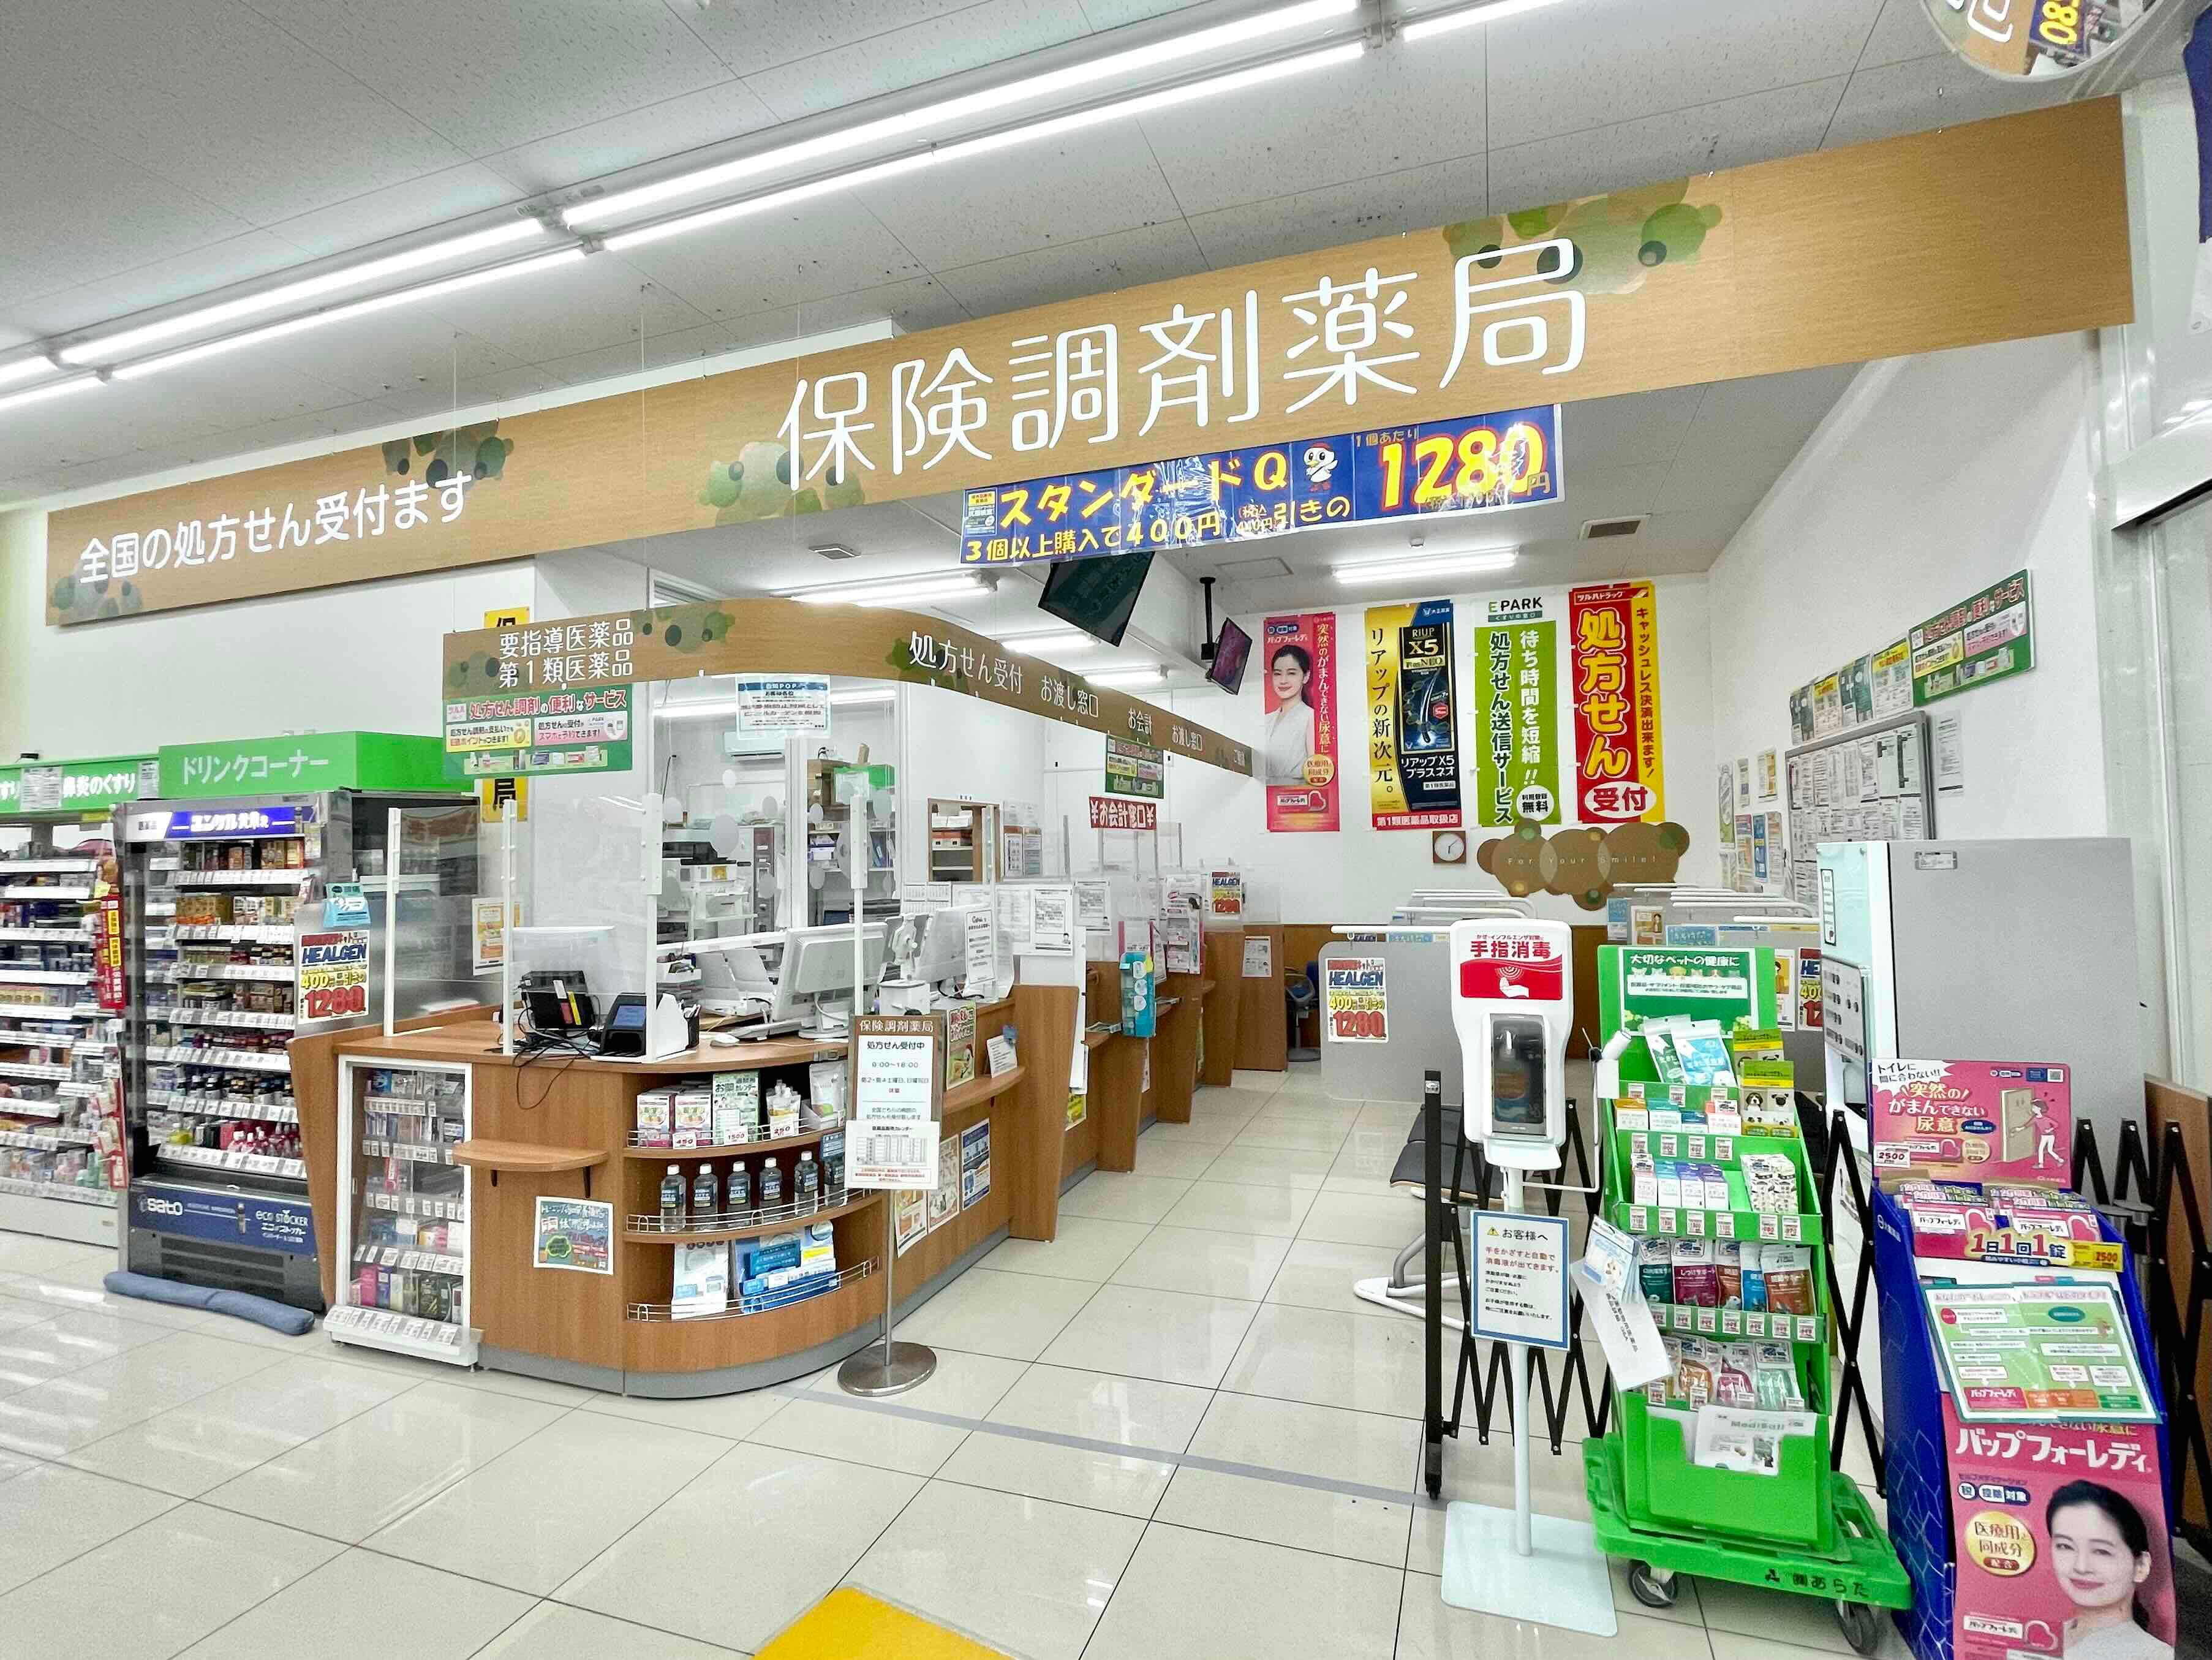 Images 調剤薬局ツルハドラッグ 気仙沼東新城店